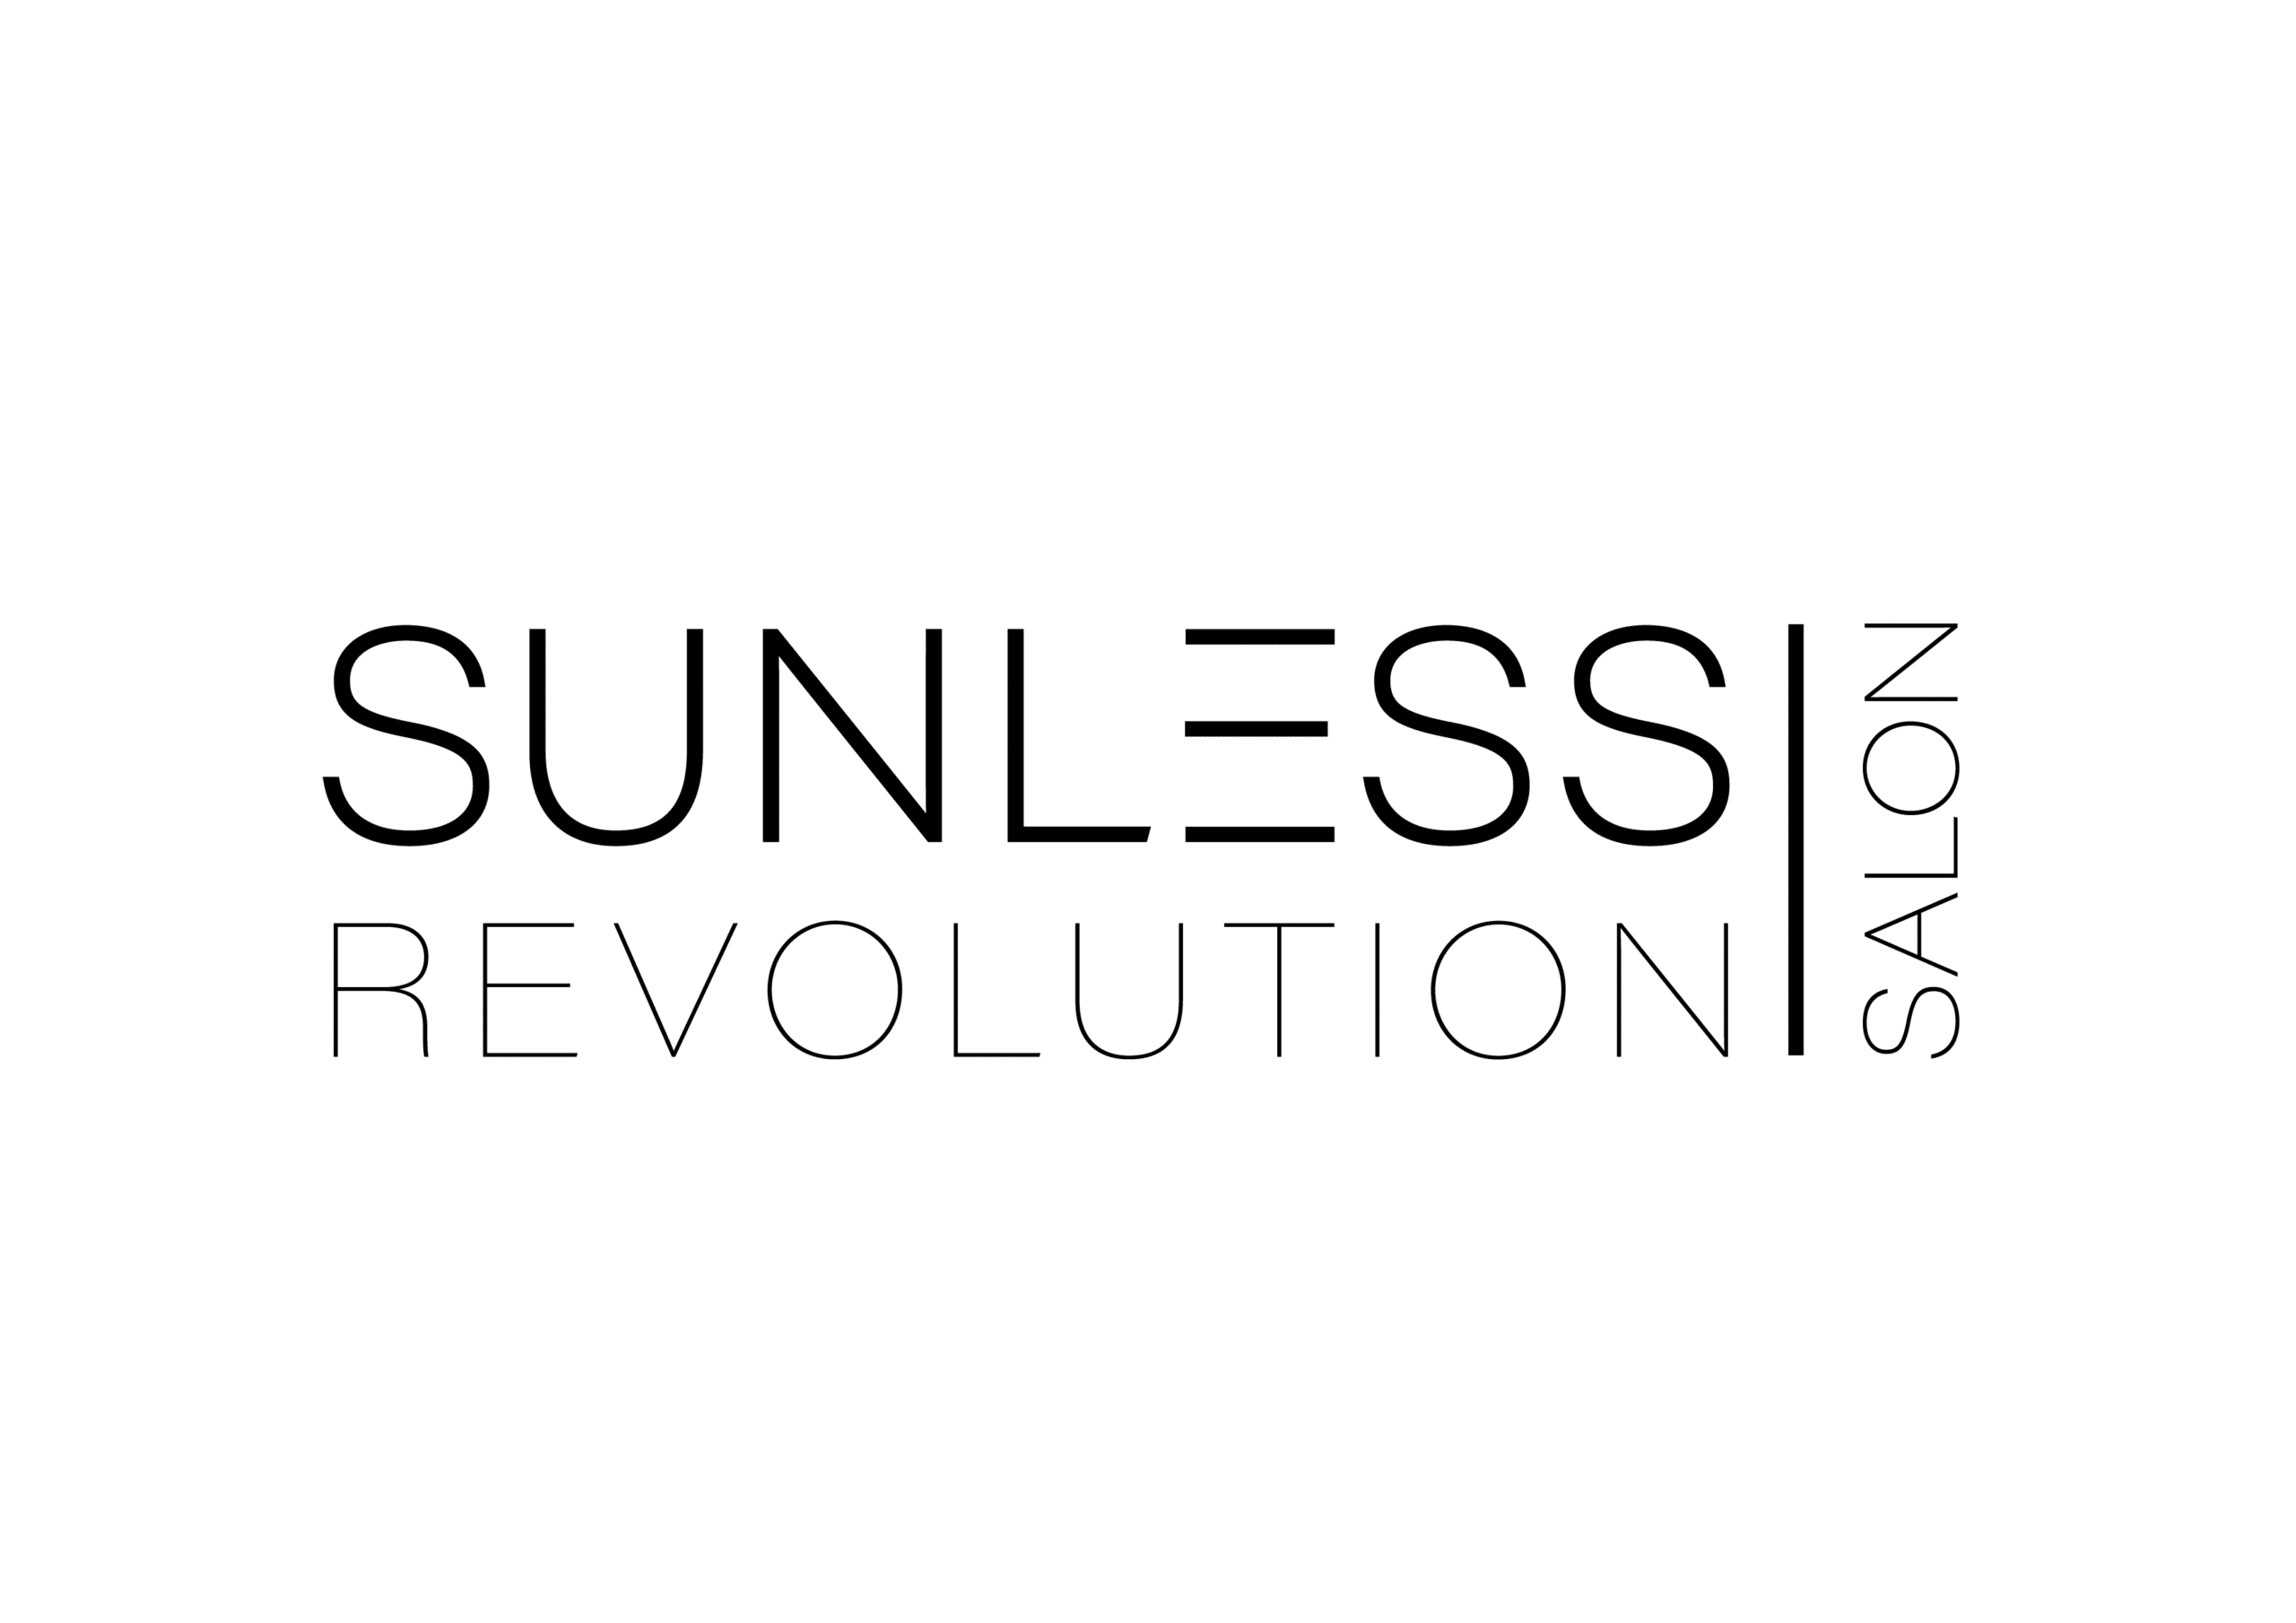 The sunless revolution logo on a white background.